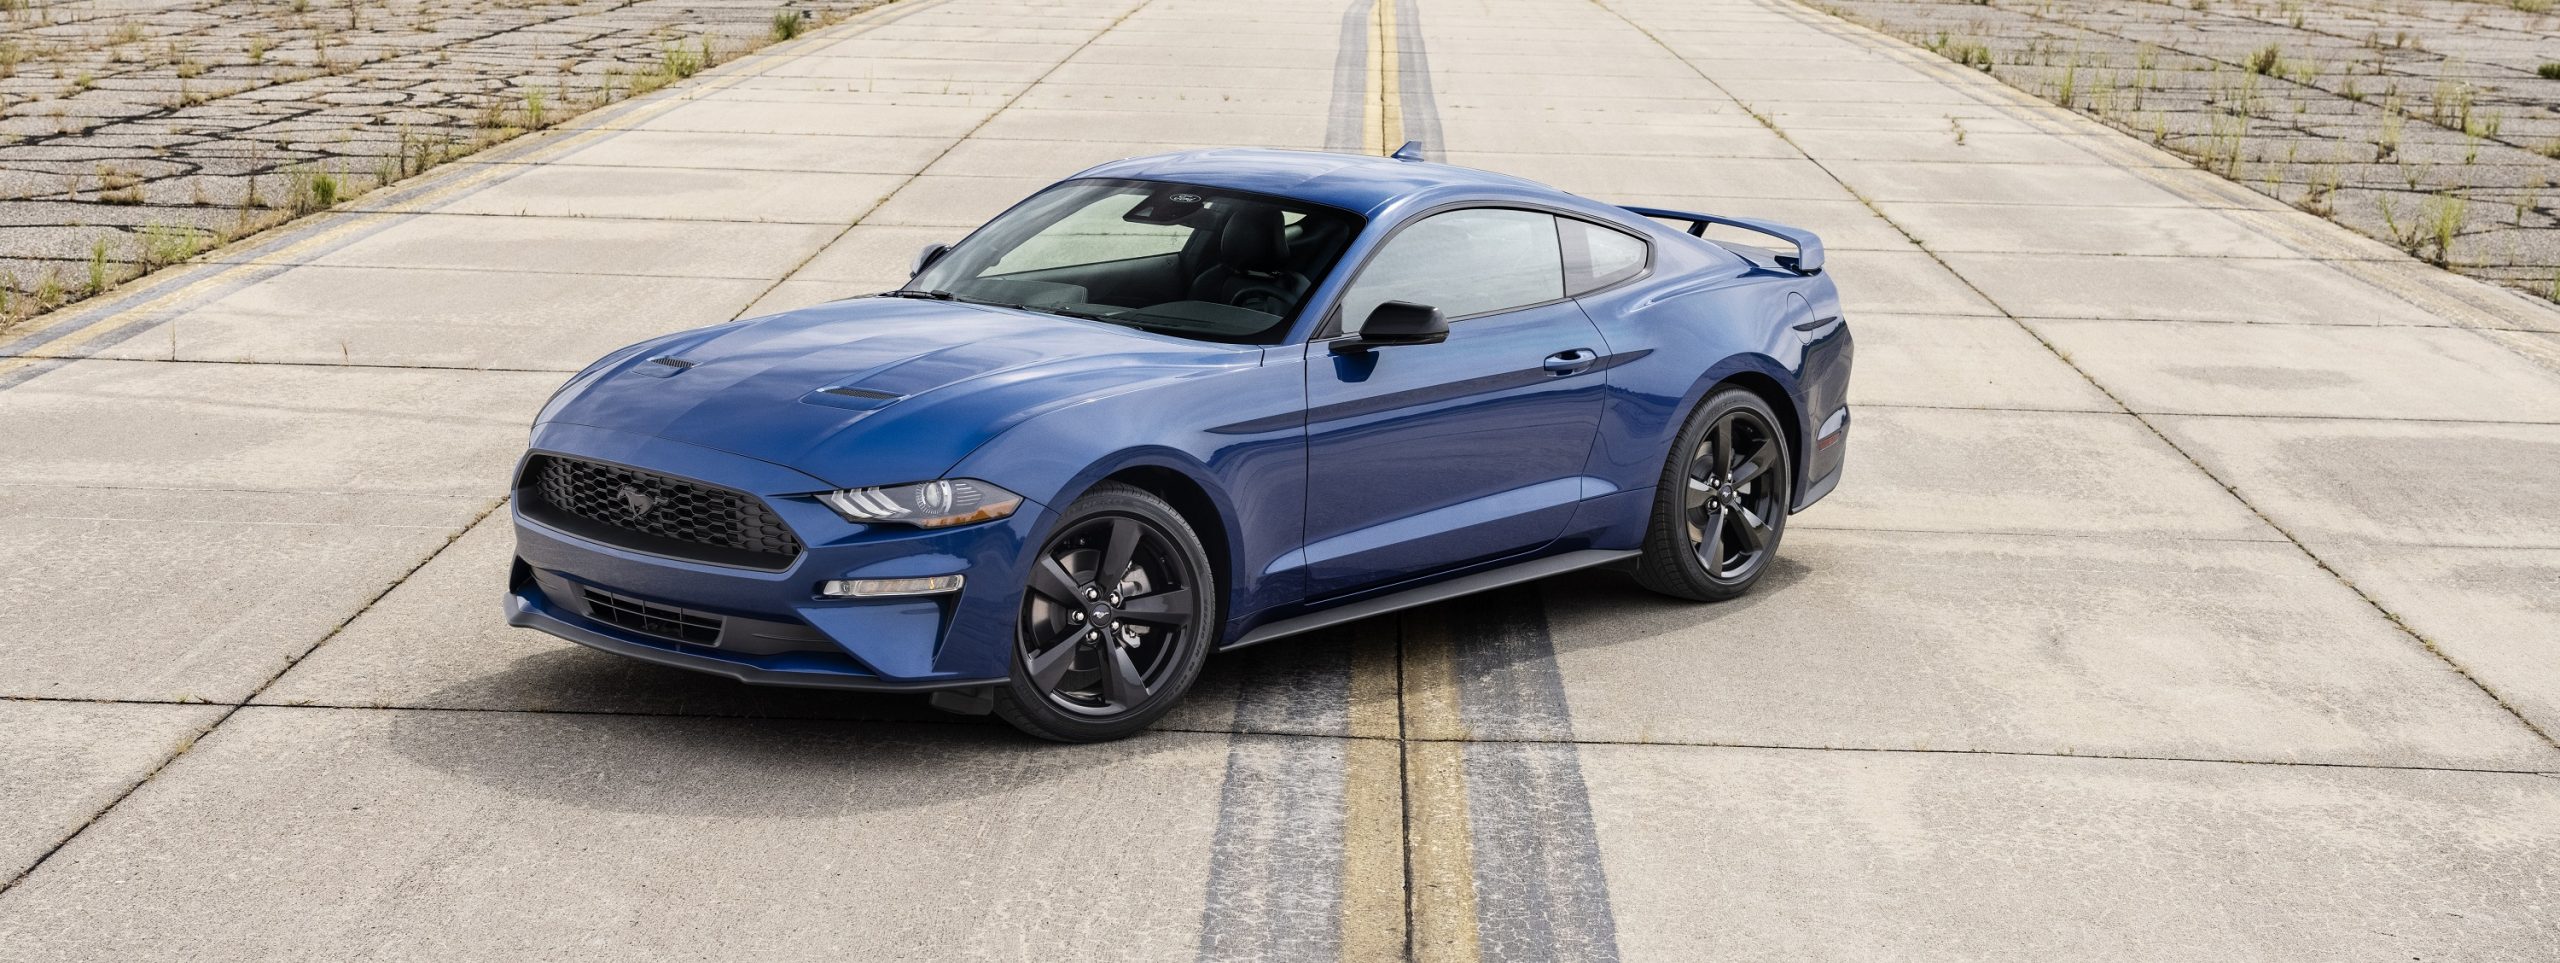 Why Will the 2022 Ford Mustang Have Less Horsepower?